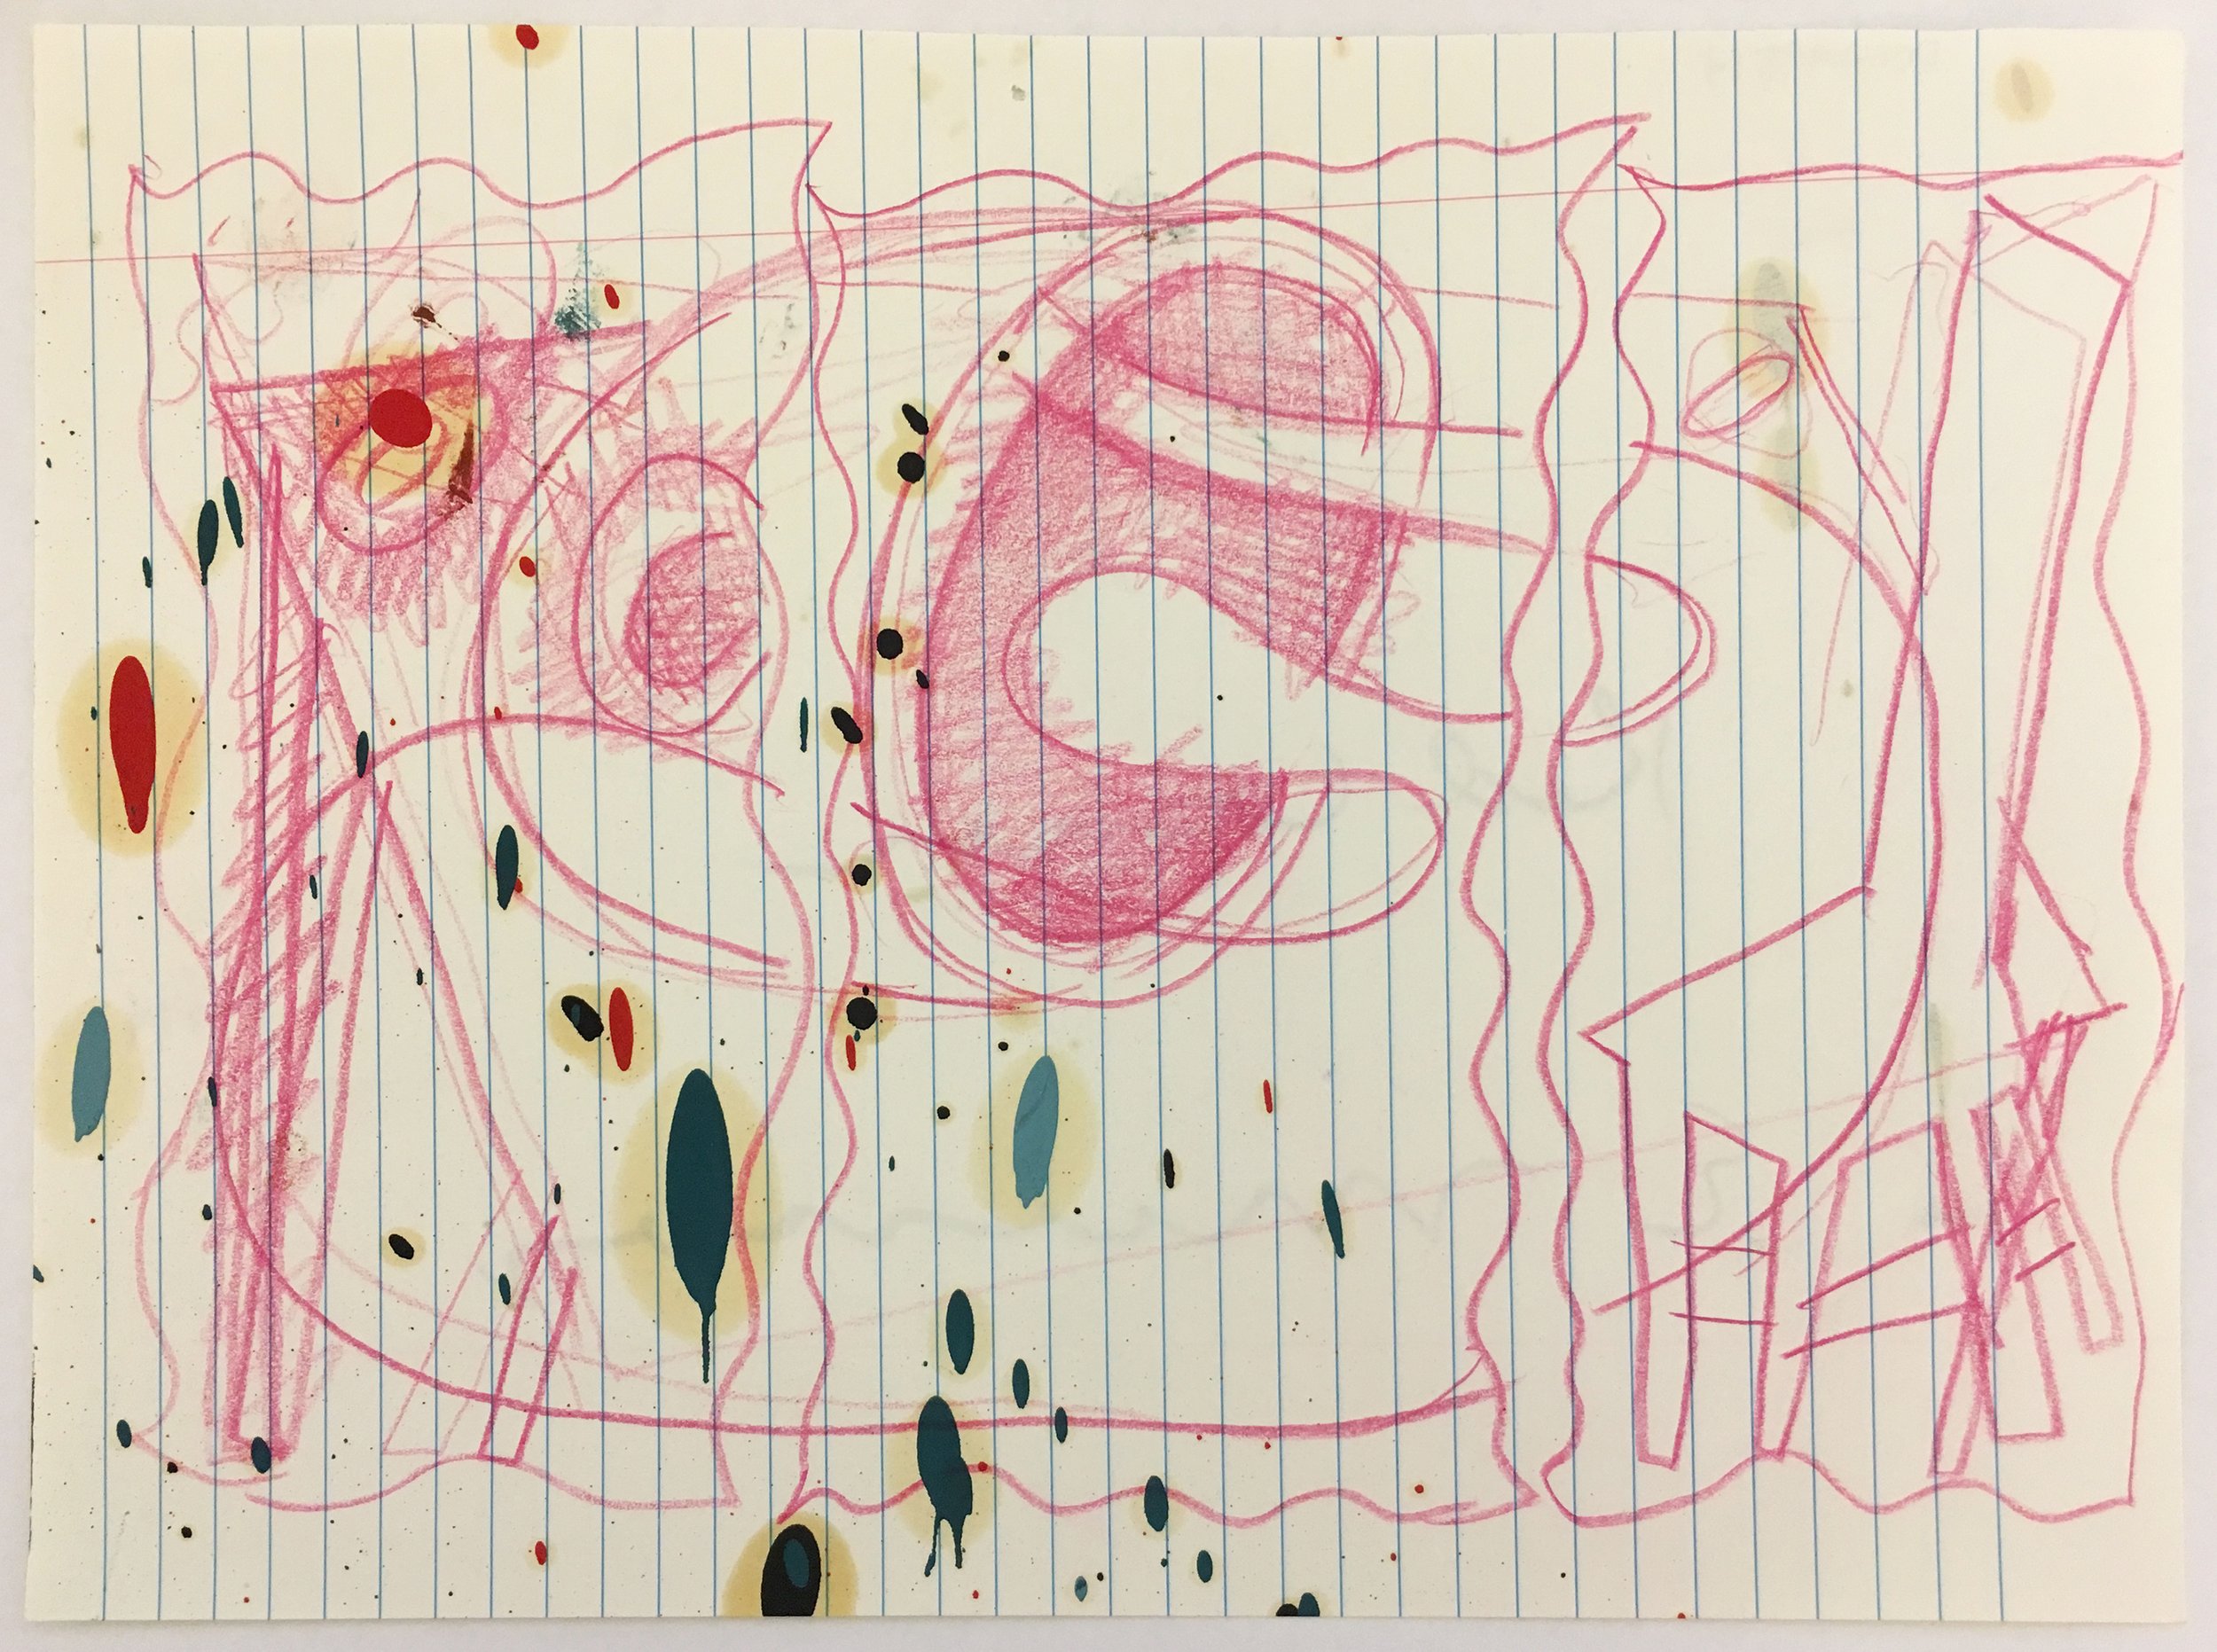  Elizabeth Murray, Red Corner, 1995, colored pencil on lined notebook paper with oil paint, 7.25 x 9.31 inches. Collection of Jason Andrew + Norman Jabaut, Brooklyn.© 2021 The Murray-HolmanFamily Trust / Artists Rights Society (ARS), New York. 